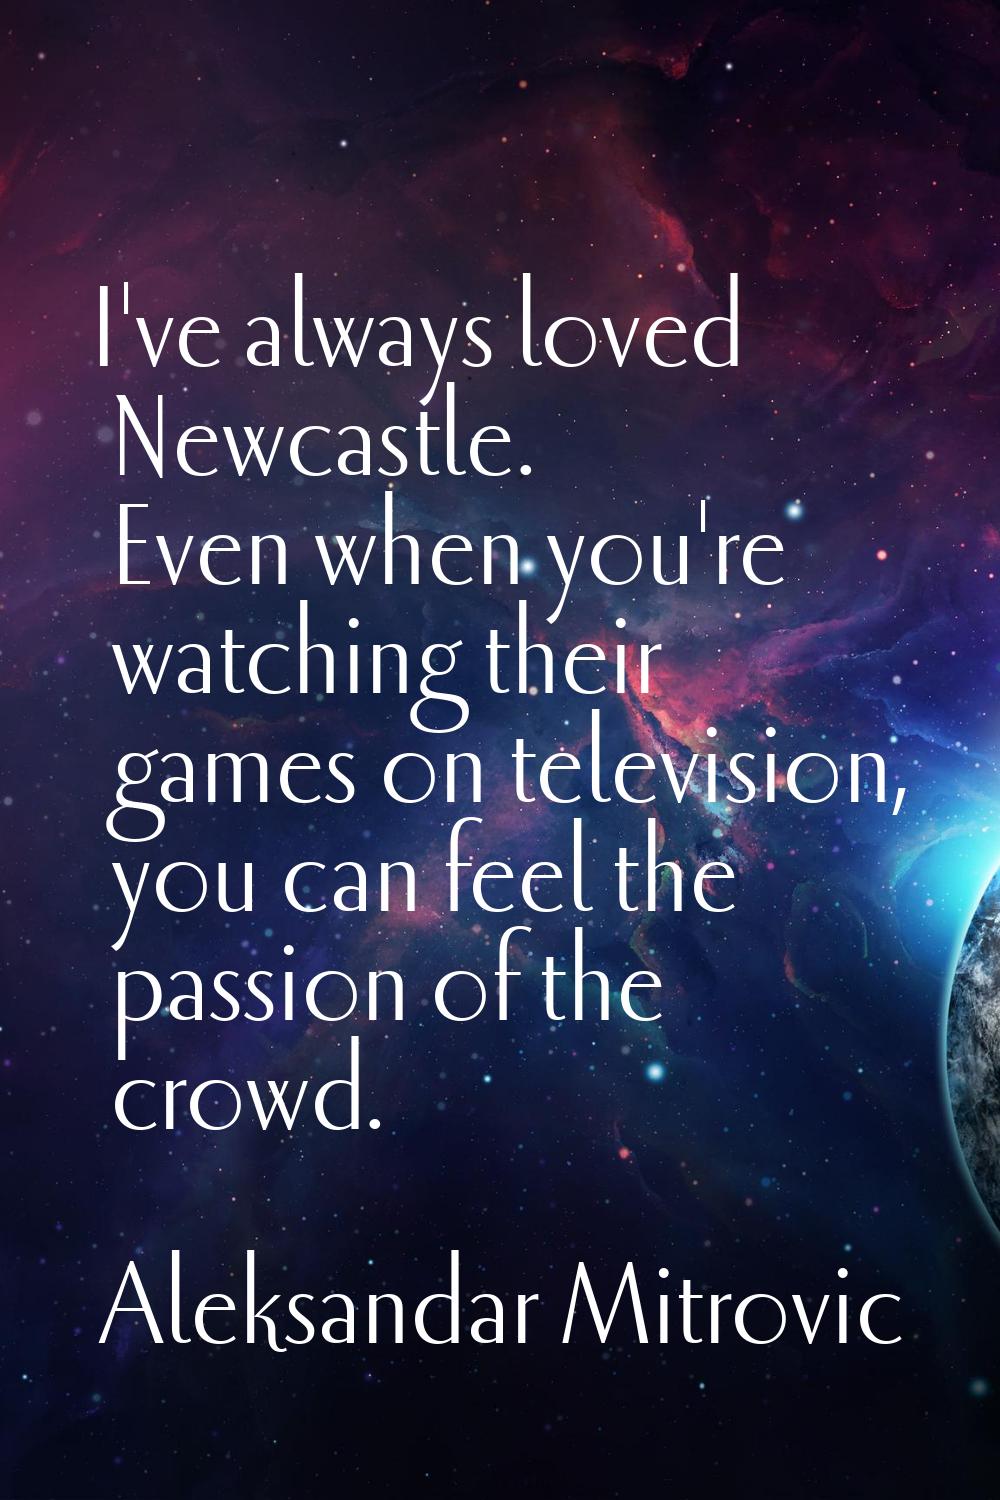 I've always loved Newcastle. Even when you're watching their games on television, you can feel the 